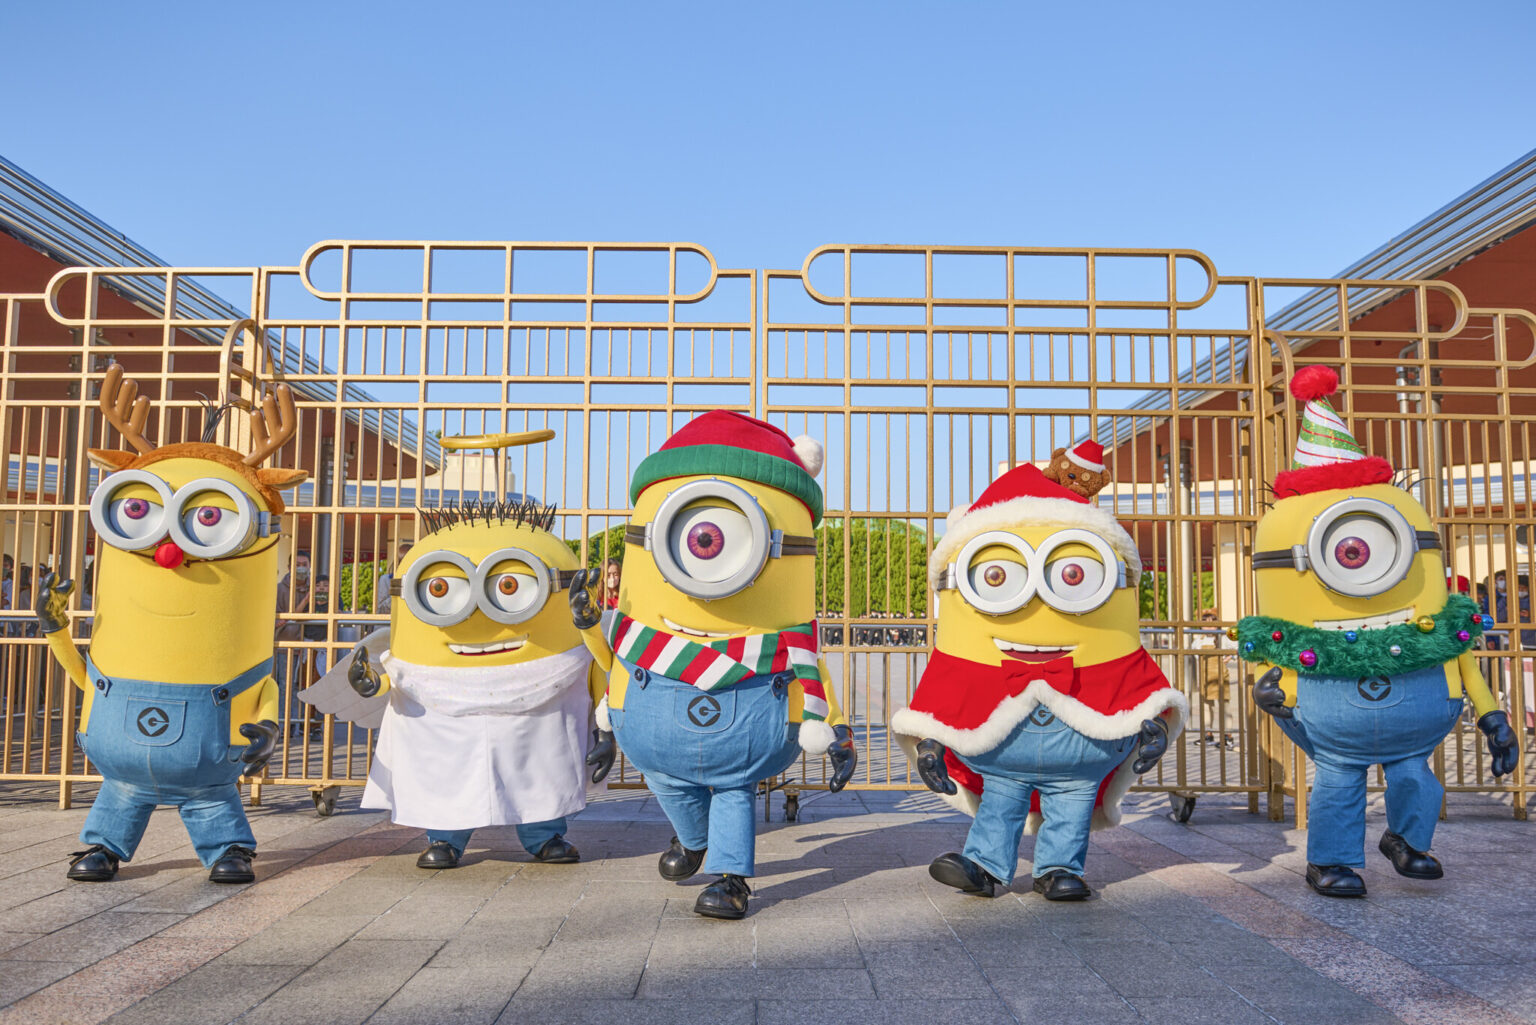 Minions and all related elements and indicia TM & © 2022 Universal Studios. All rights reserved. 画像提供:ユニバーサル・スタジオ・ジャパン